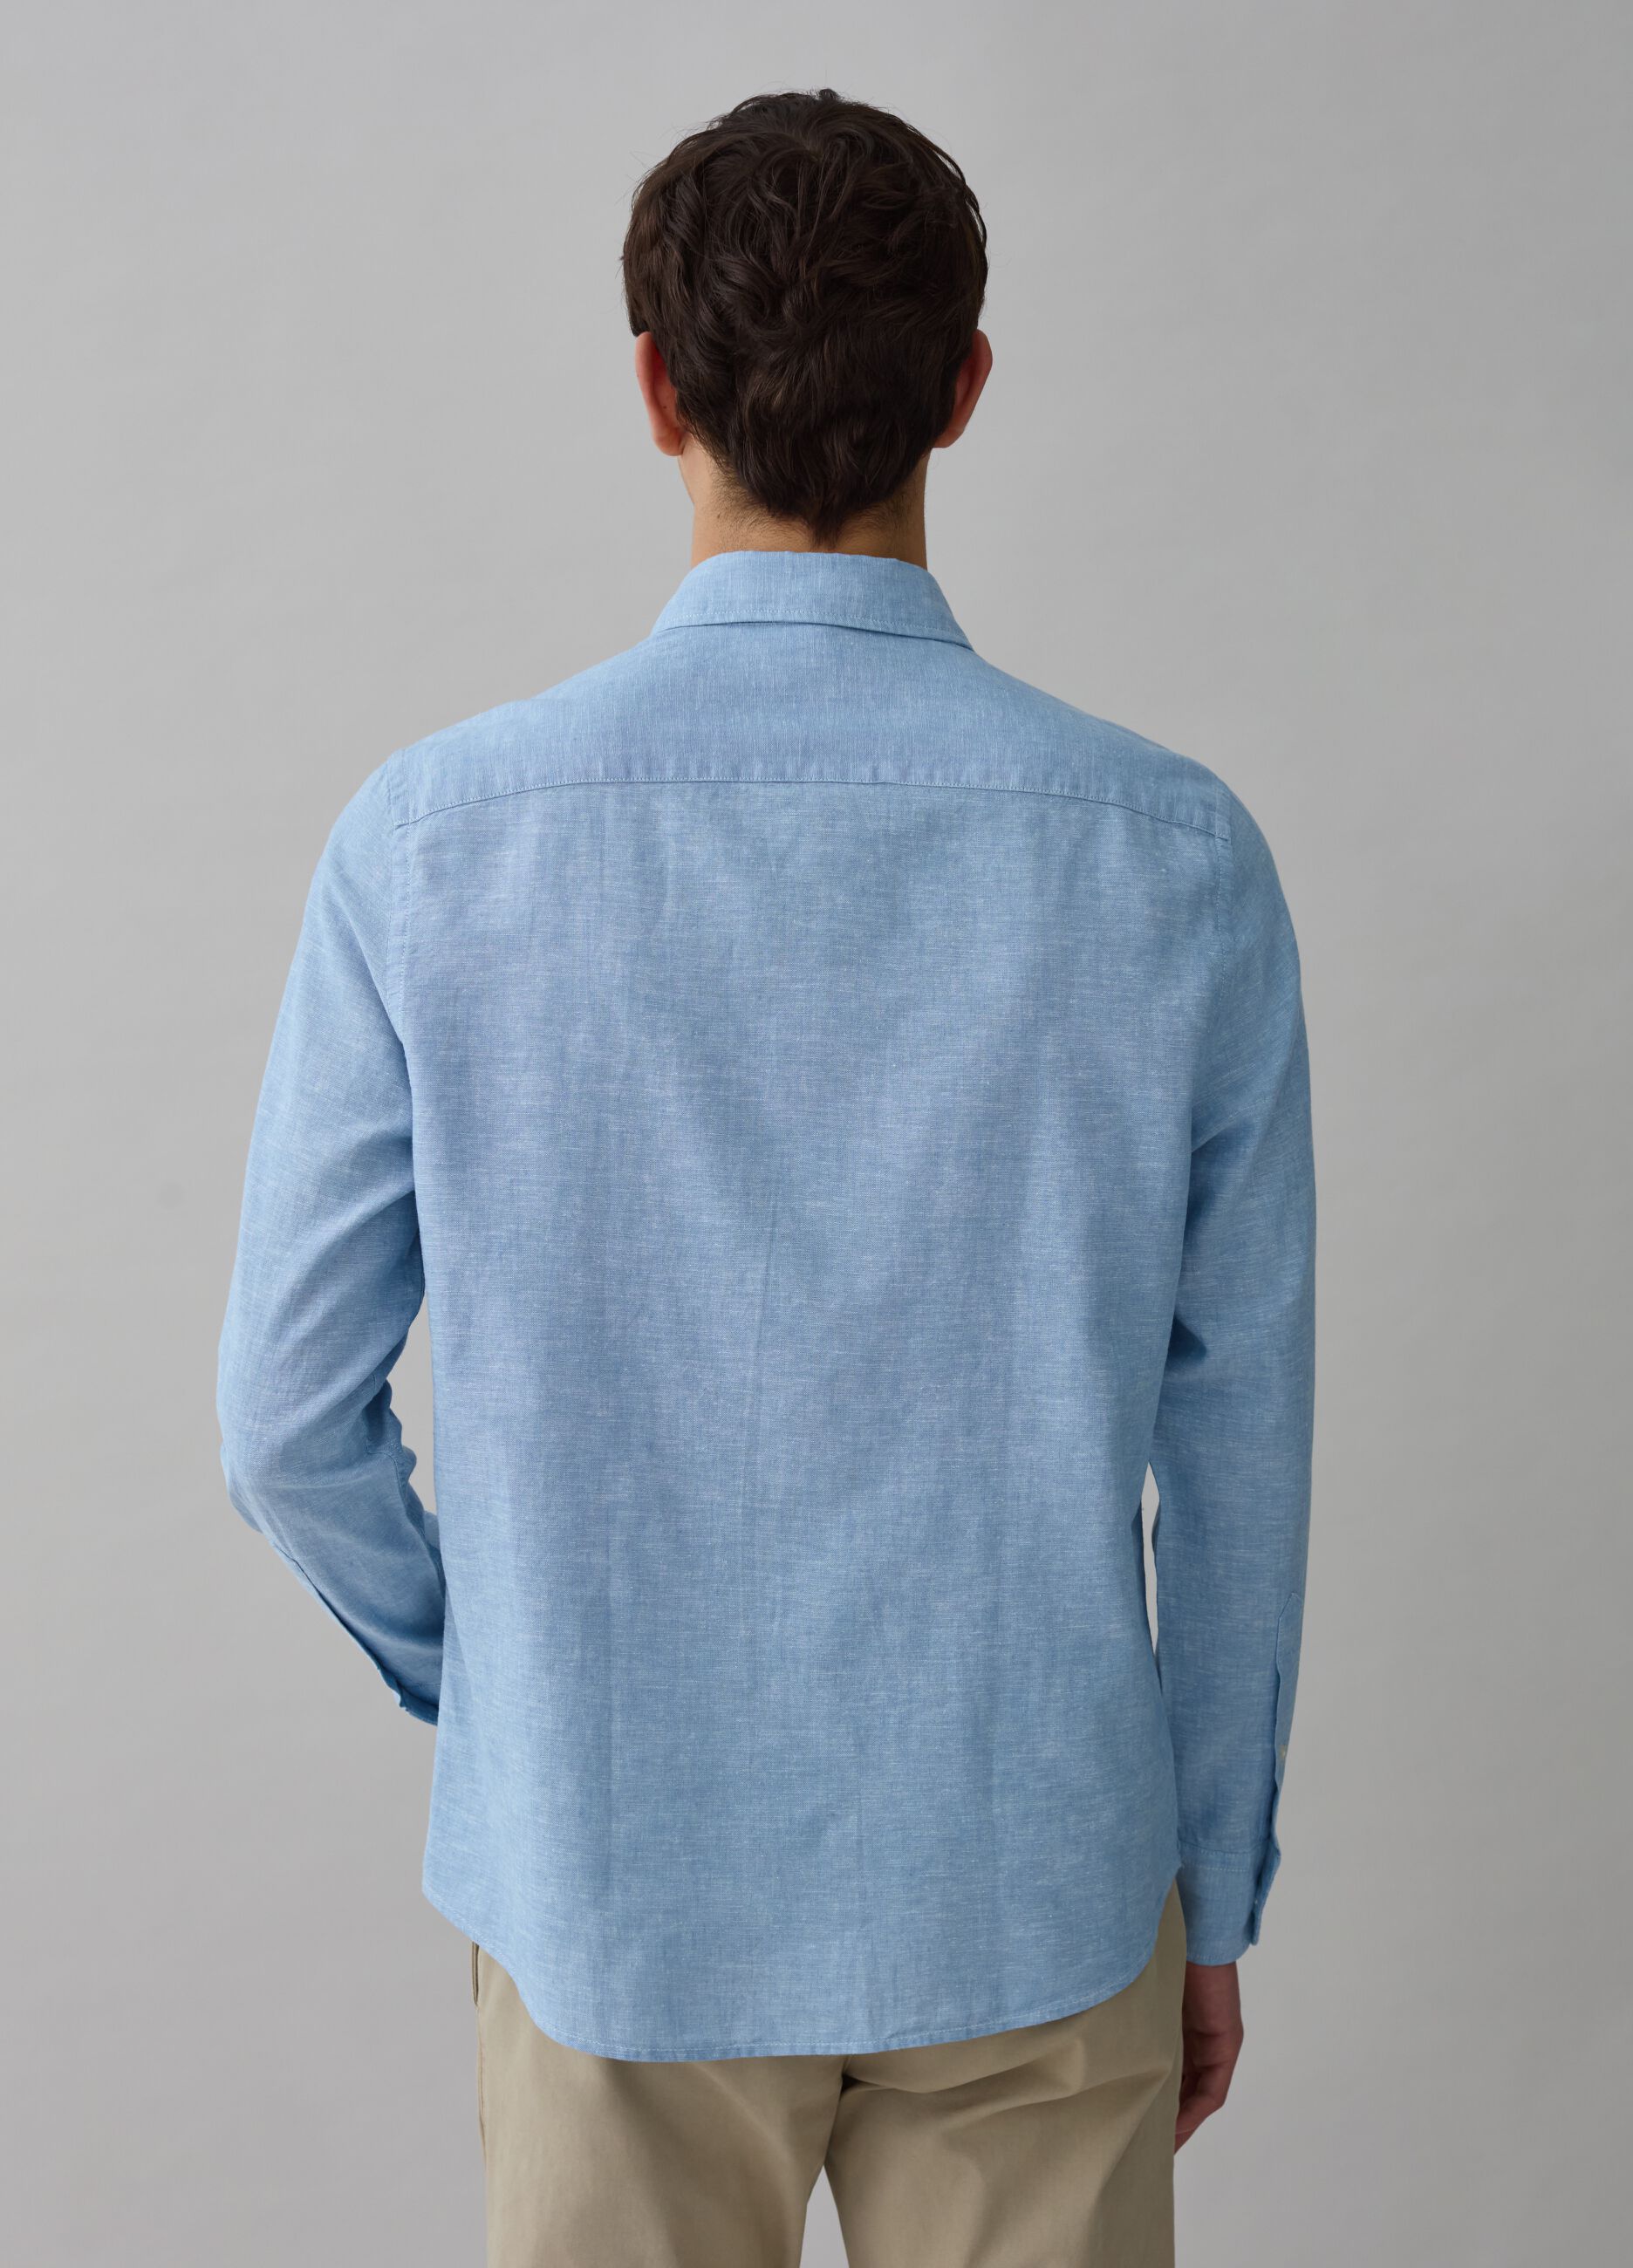 Shirt in chambray cotton and linen